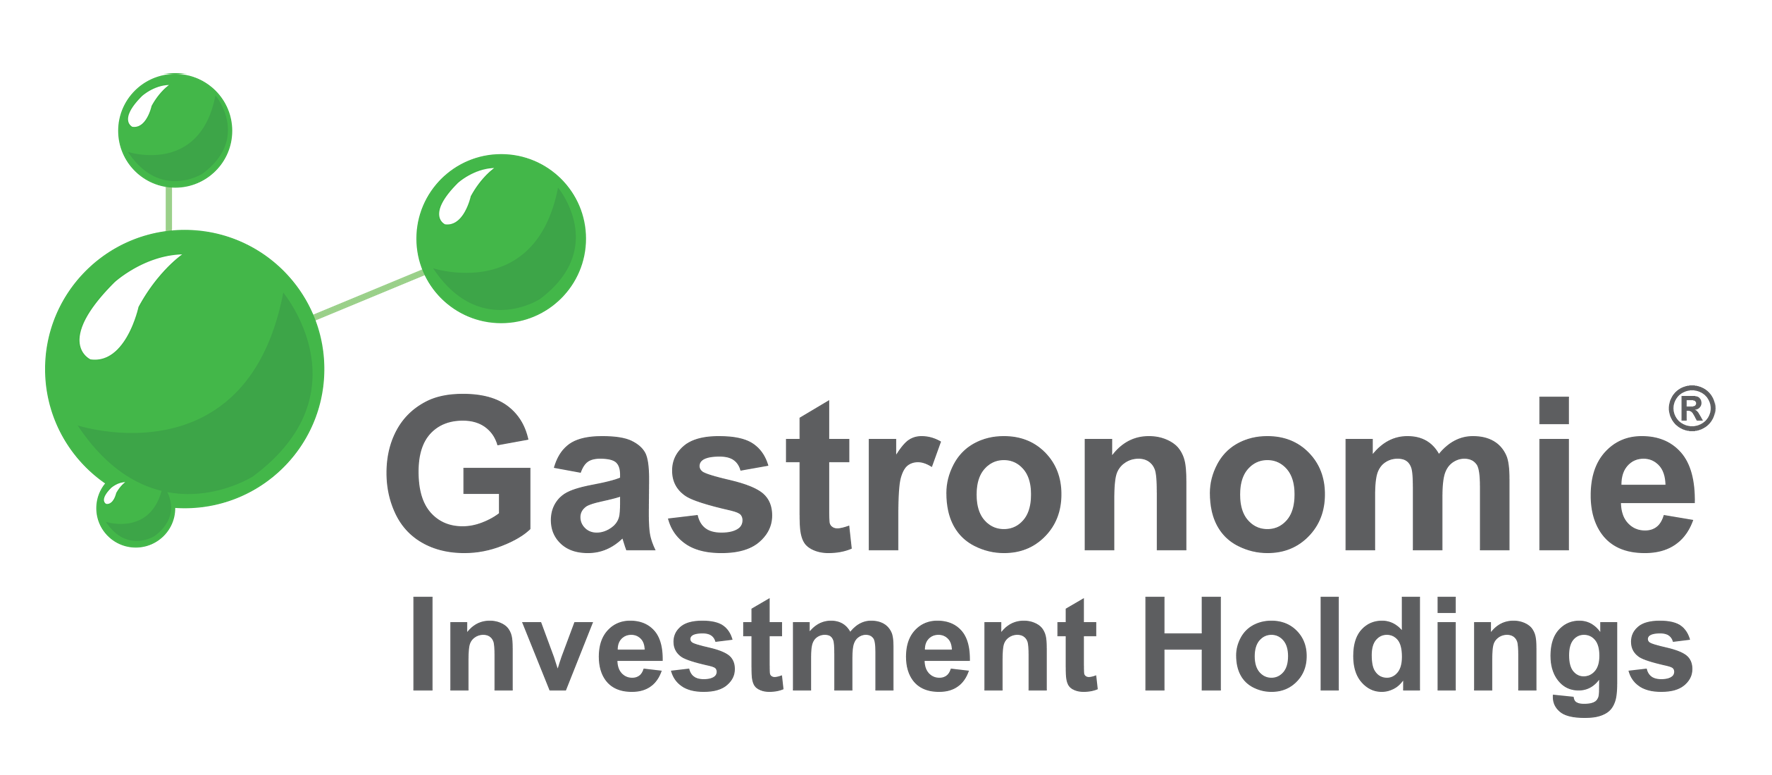 Gastronomie Investment Holdings